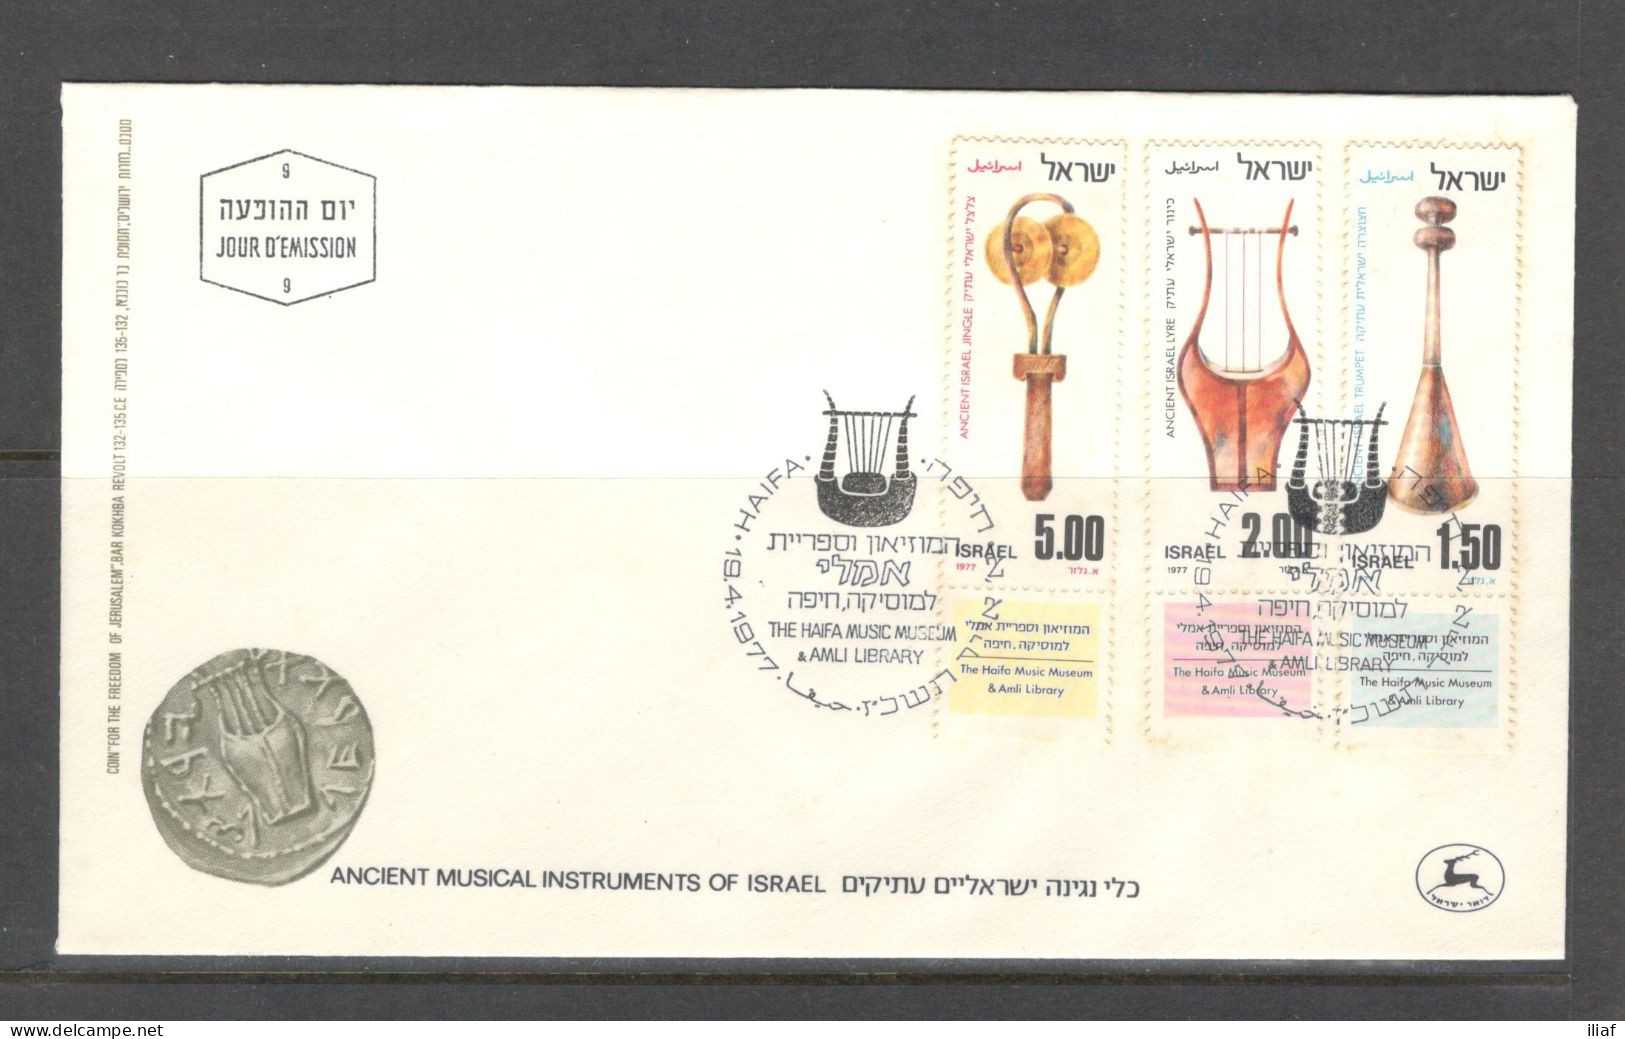 Israel 1977 FDC Sc. 628-630  Ancient Musical Instruments Of Israel   FDC Cancellation On Cachet FDC Envelope - FDC